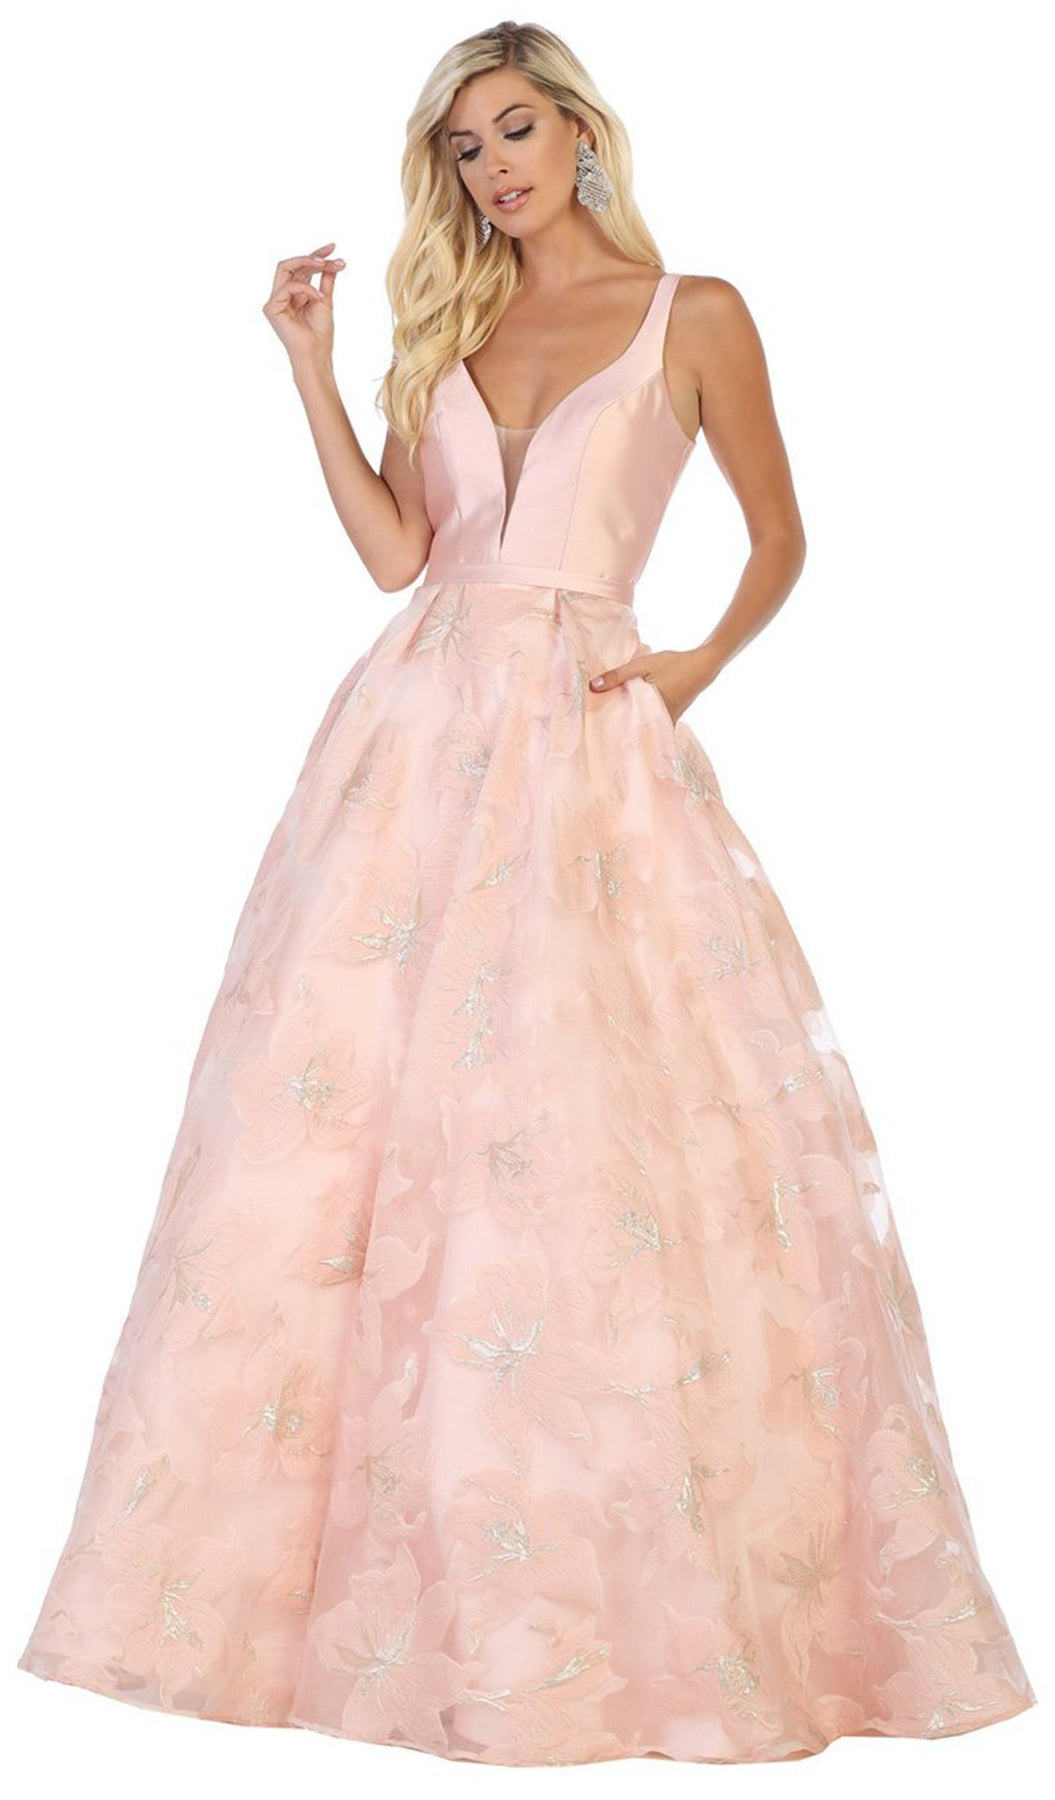 May Queen - RQ7730 Plunging V-Neck Floral Ballgown In Pink